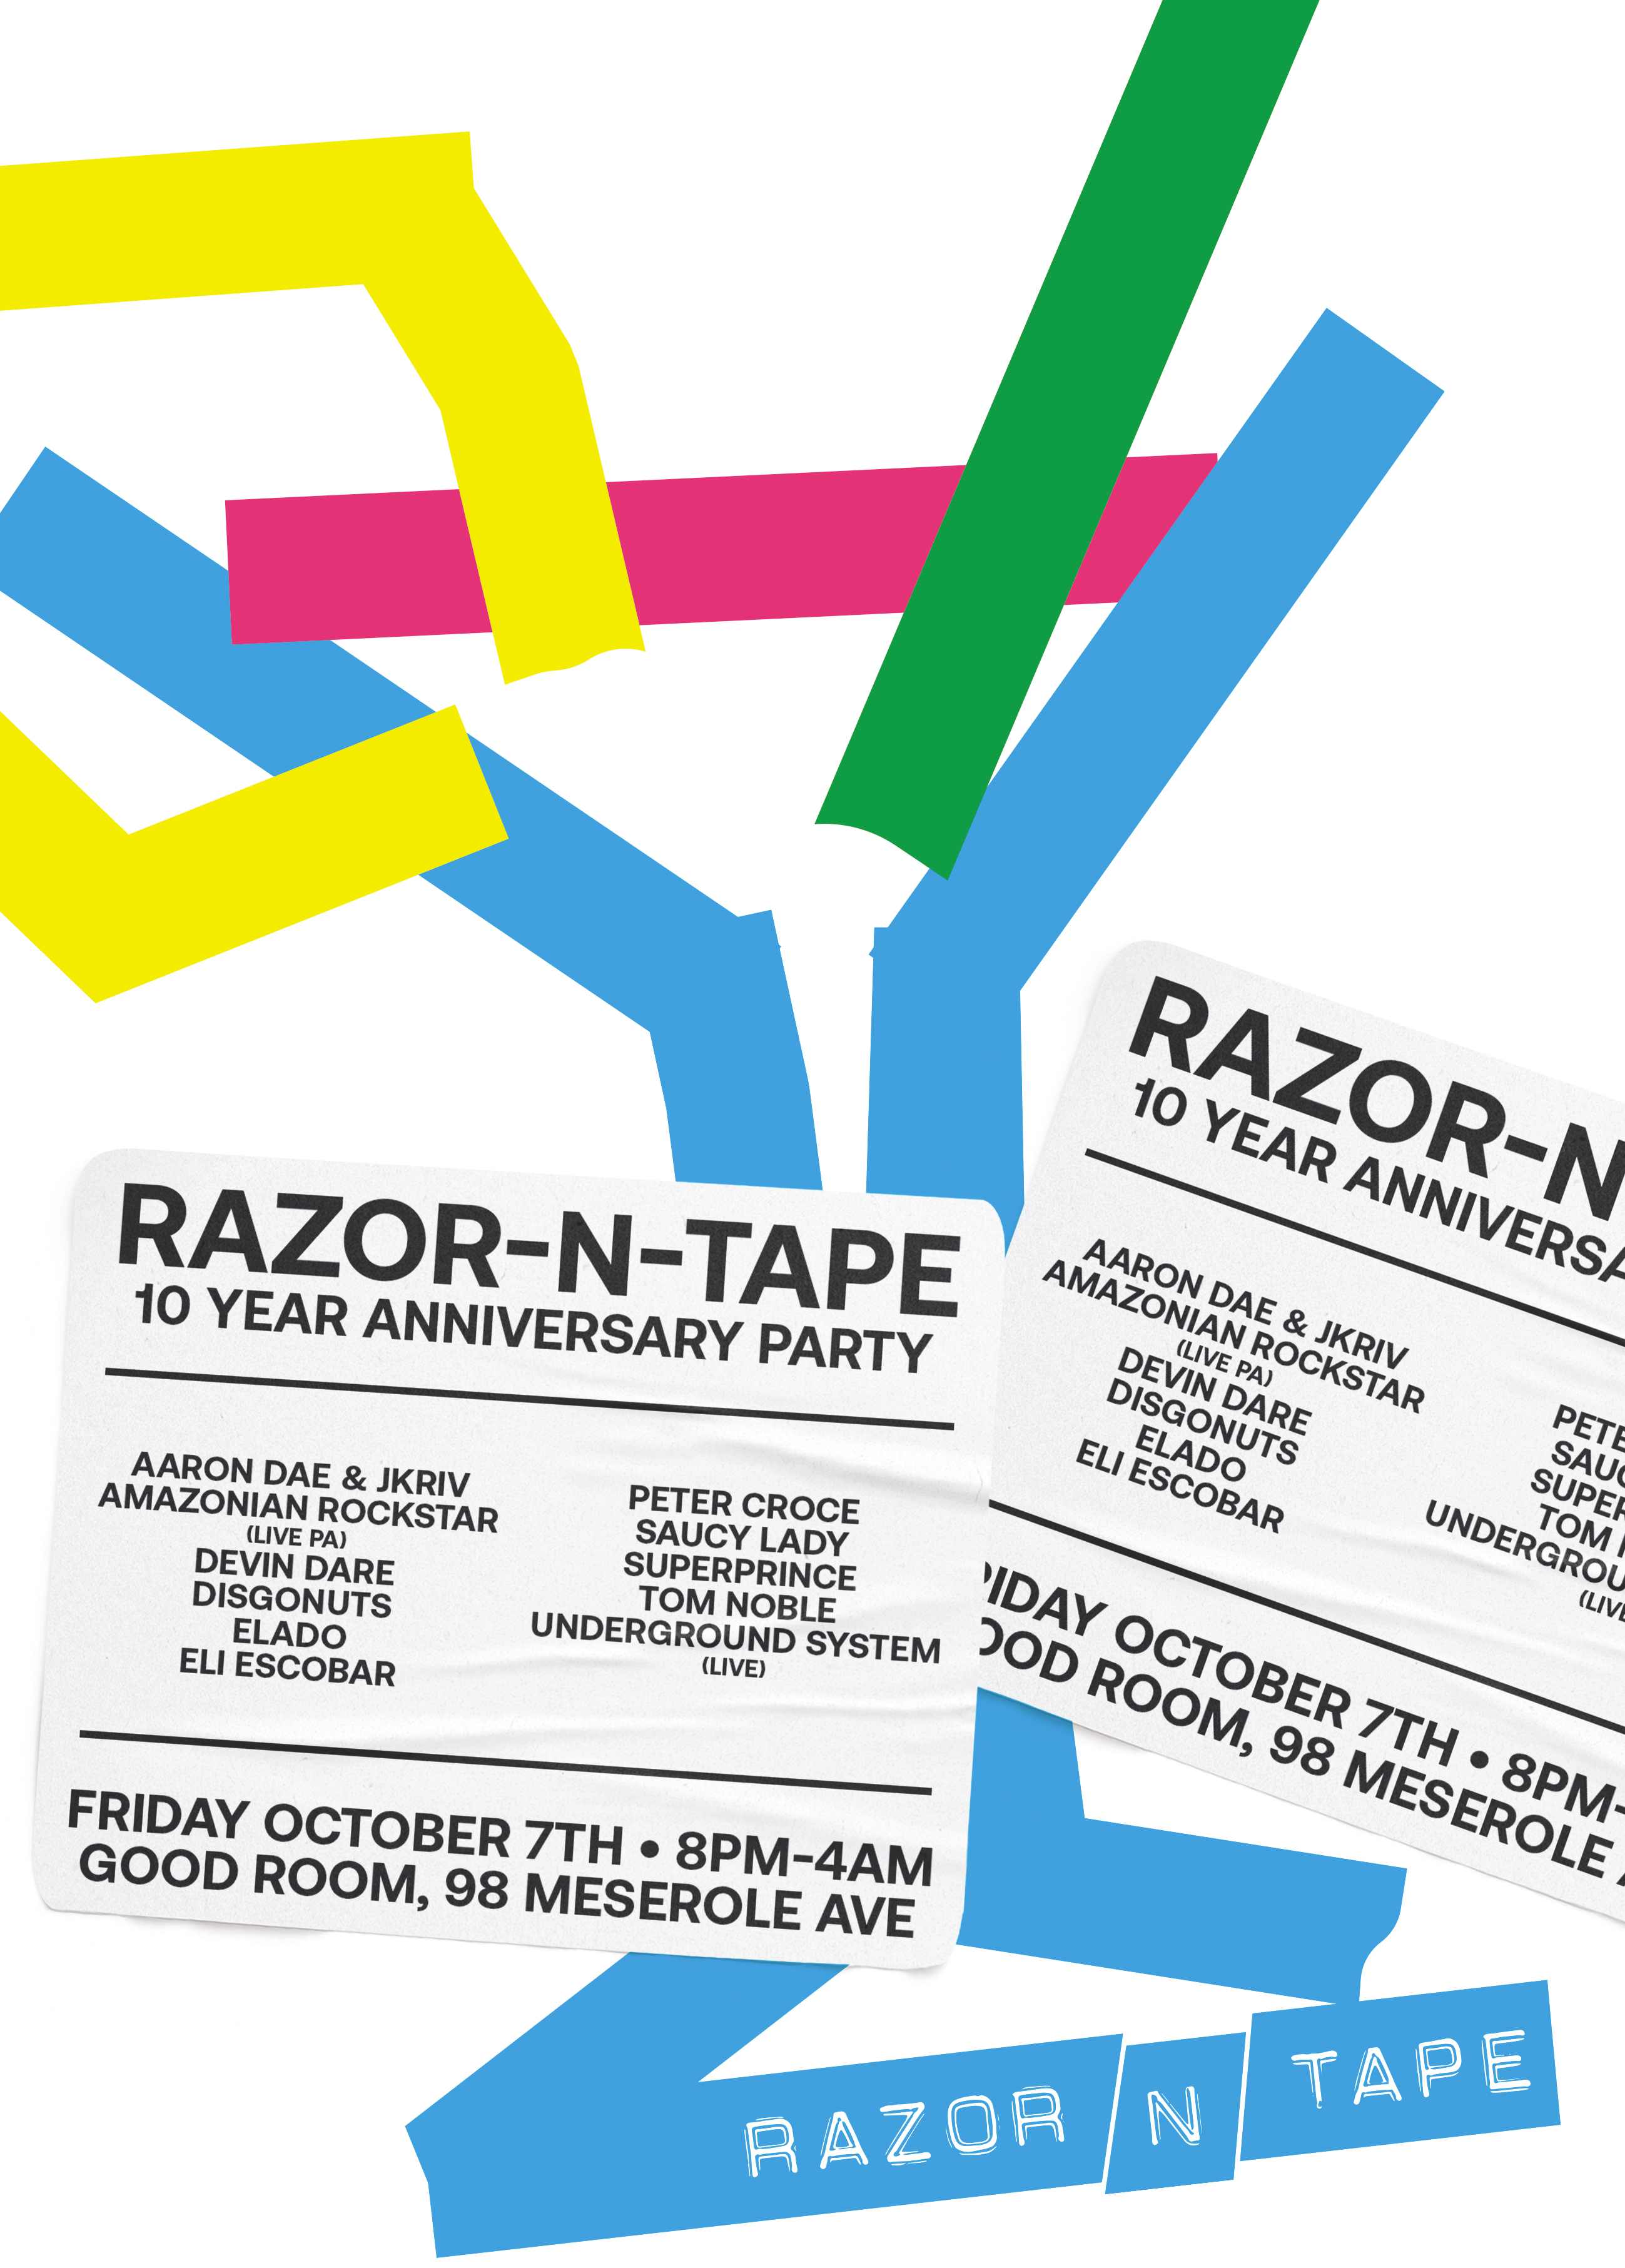 Razor-N-Tape 10 Year Anniversary Party - Flyer front